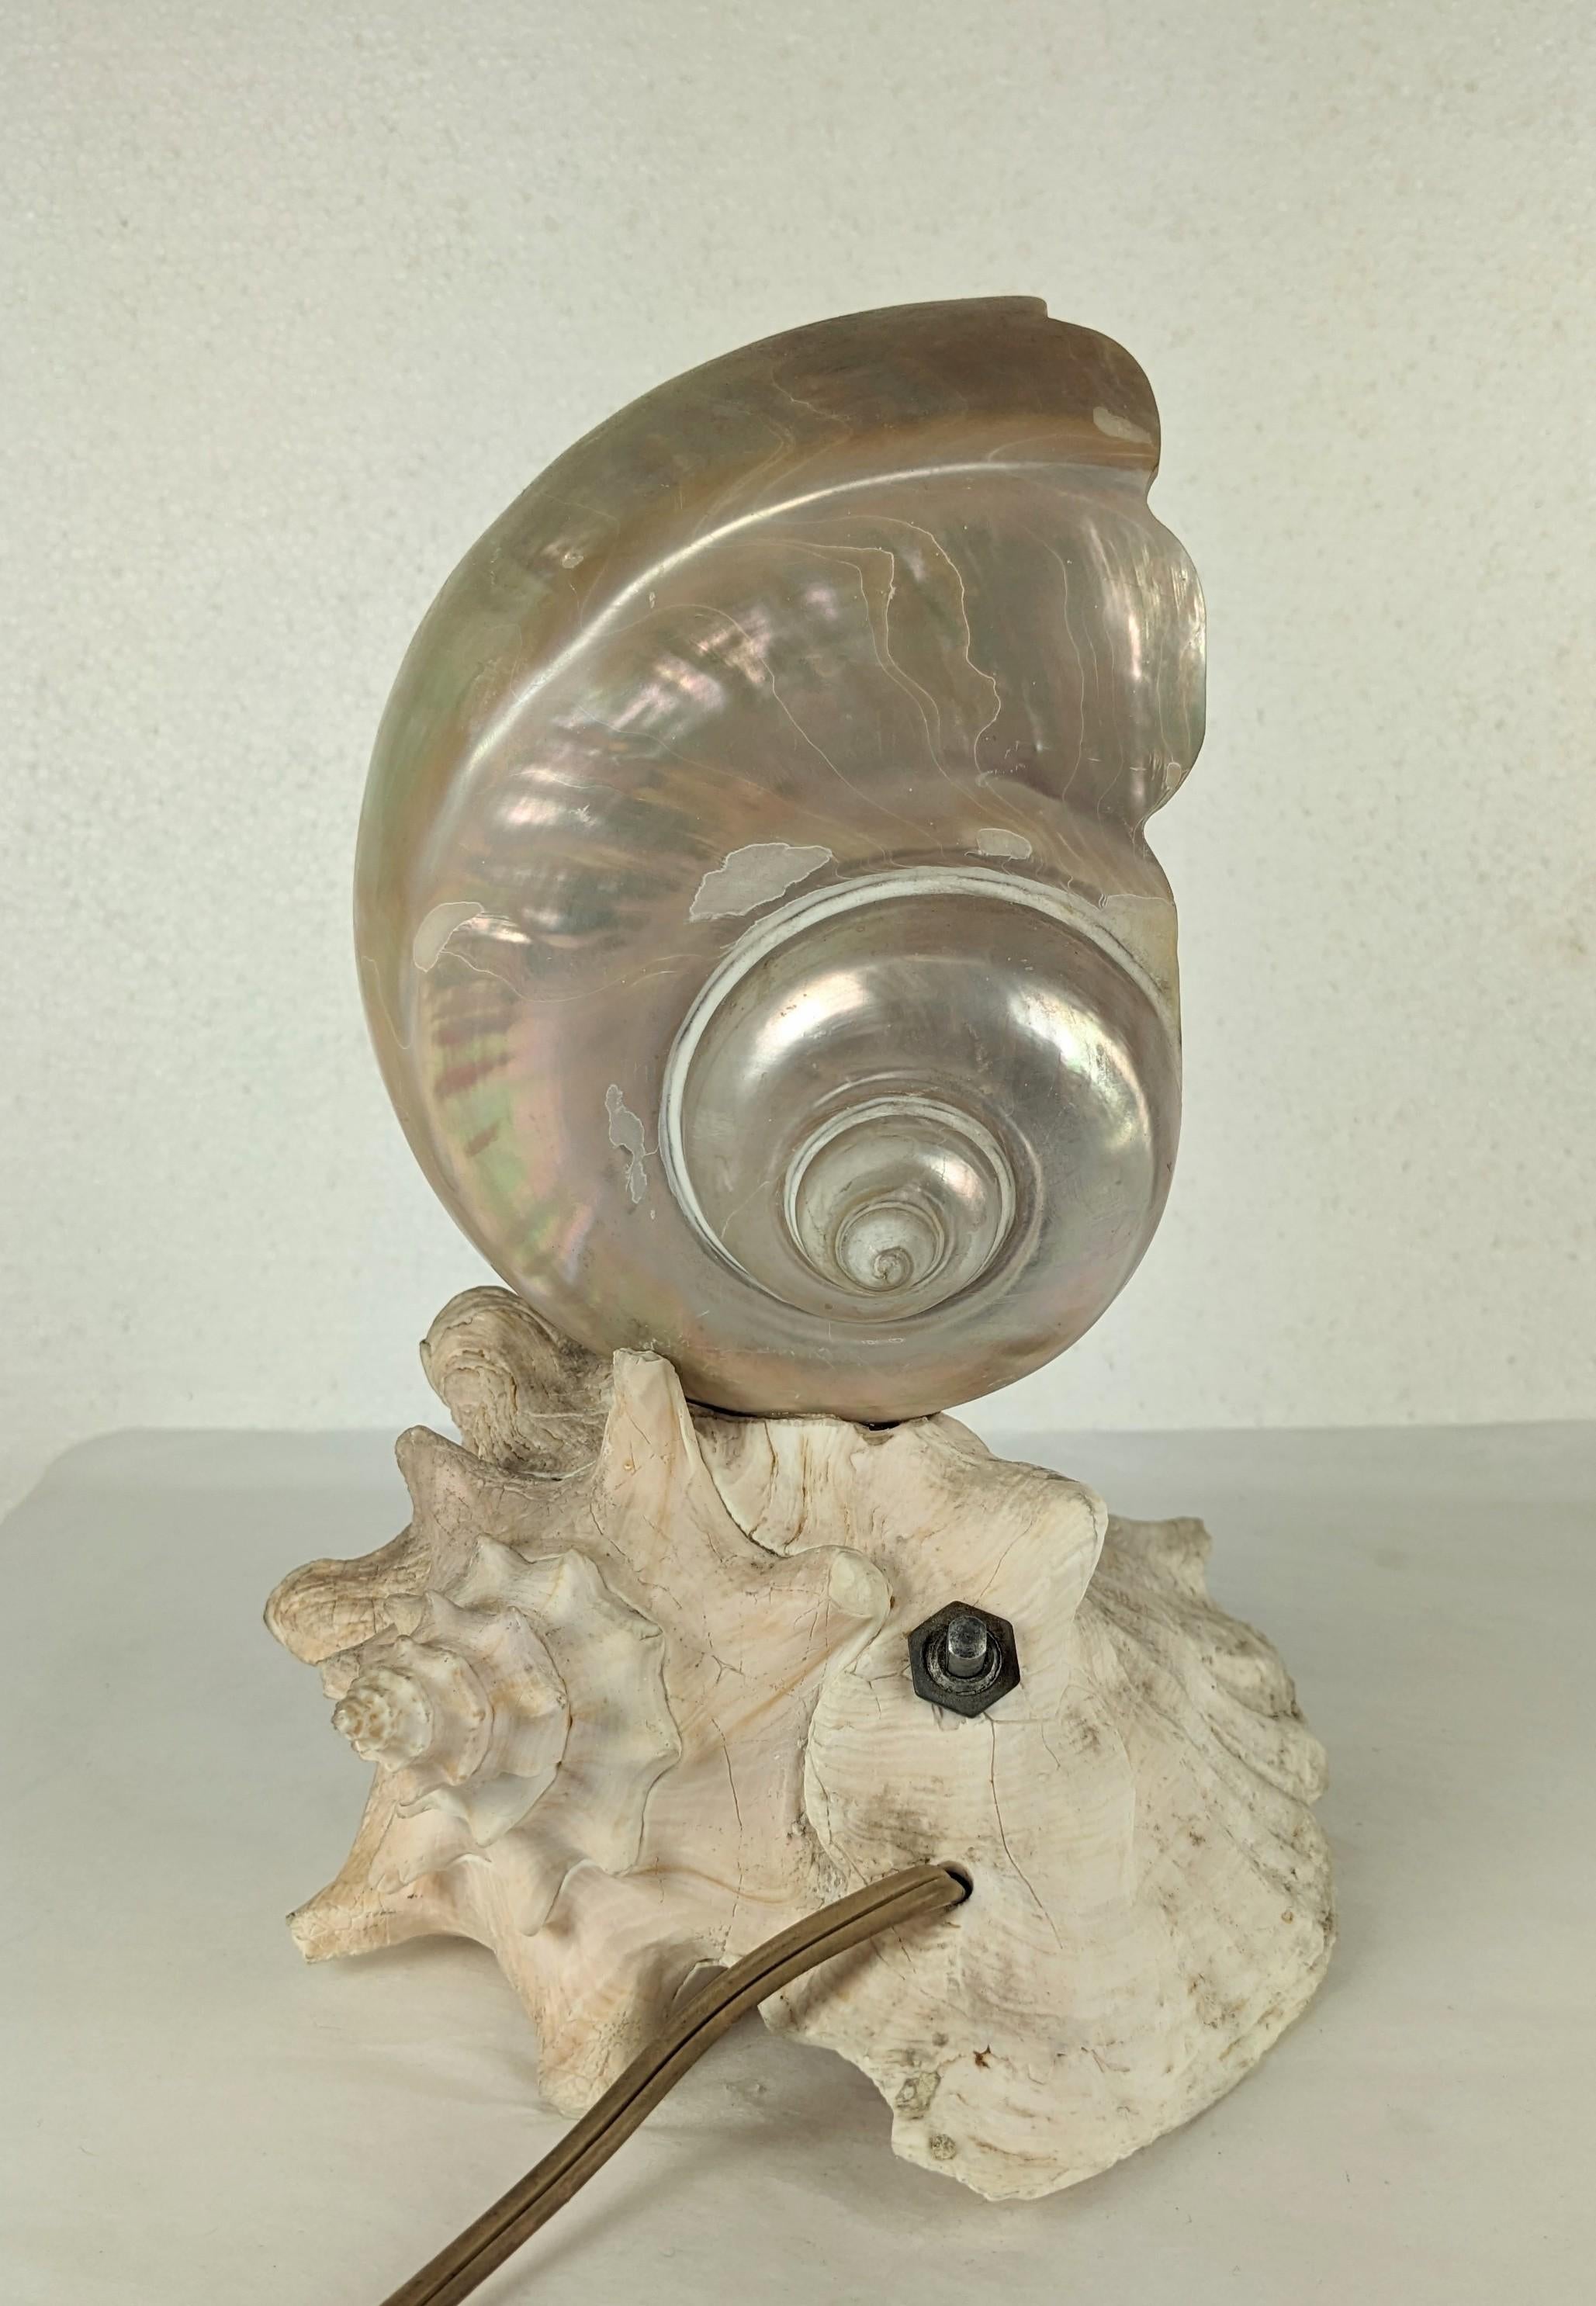 Charming Art Deco Nautilus and Conch Shell Lamp from the 1940's with original bulb. 1940's USA. 